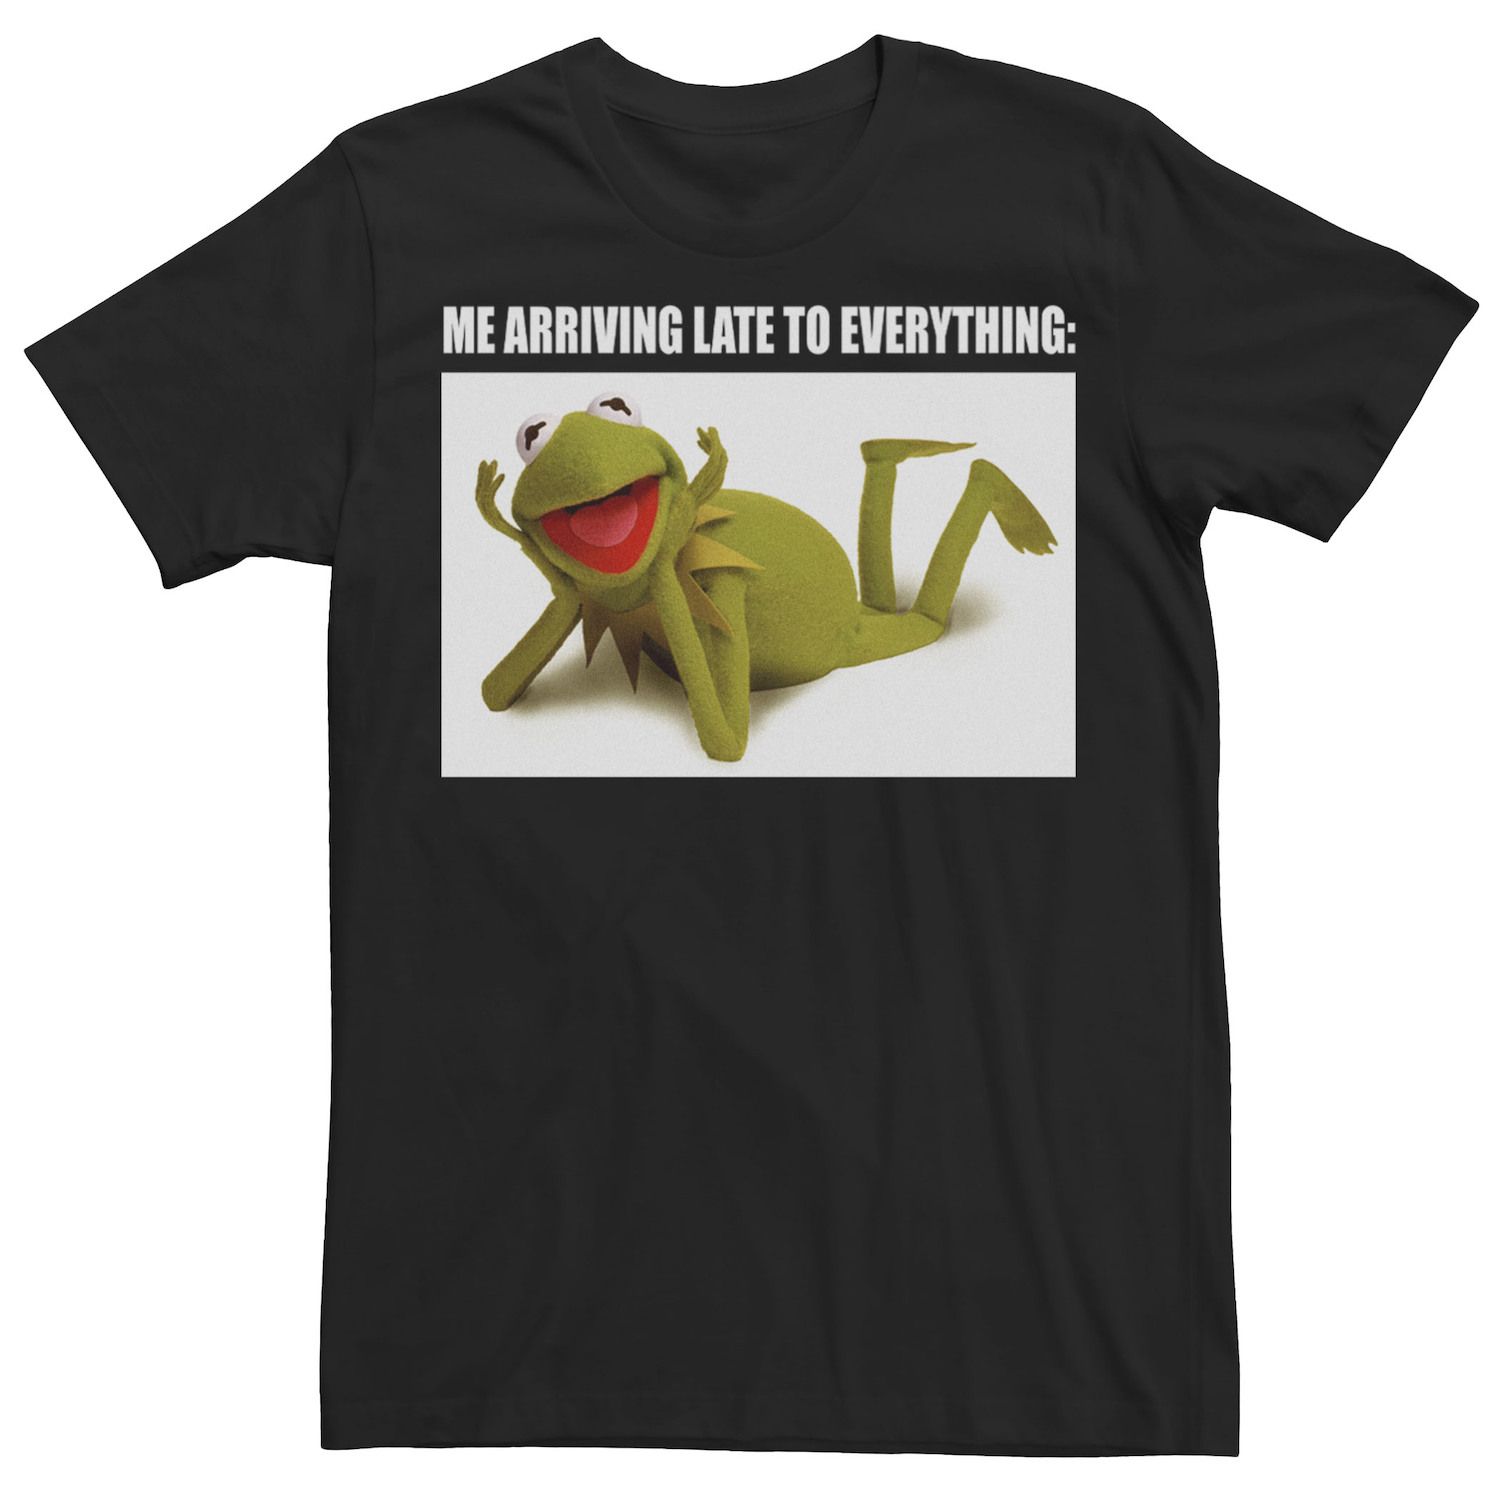 Image for Disney Big & Tall The Muppets Kermit "Me Arriving Late To Everything" Meme Tee at Kohl's.